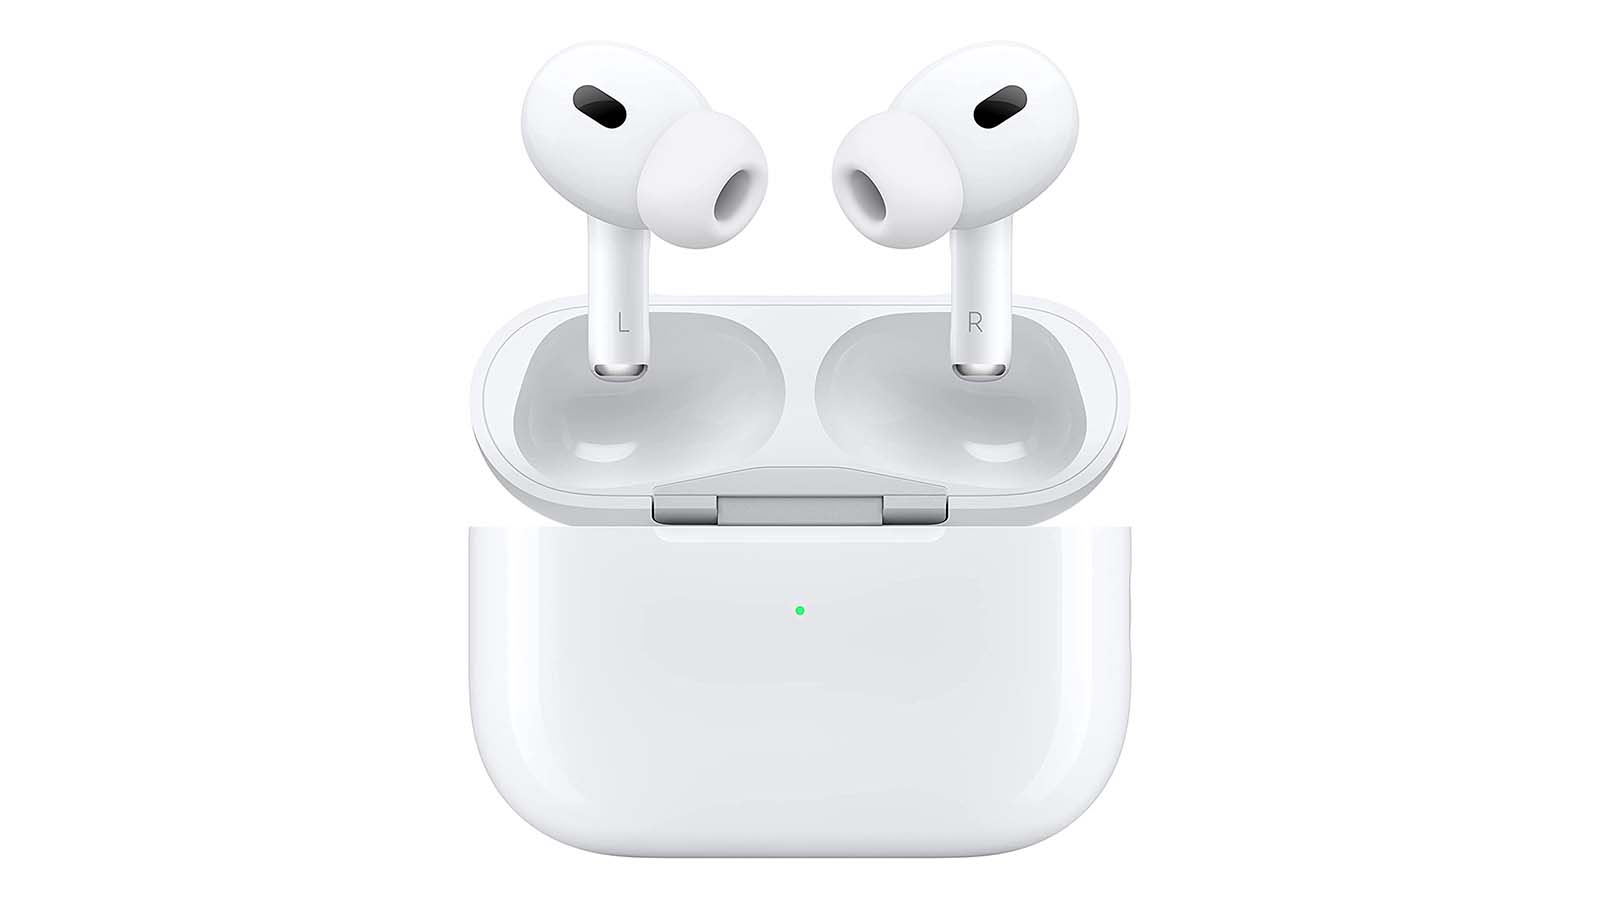 This is the best tool to safely clean your AirPods or AirPods Pro